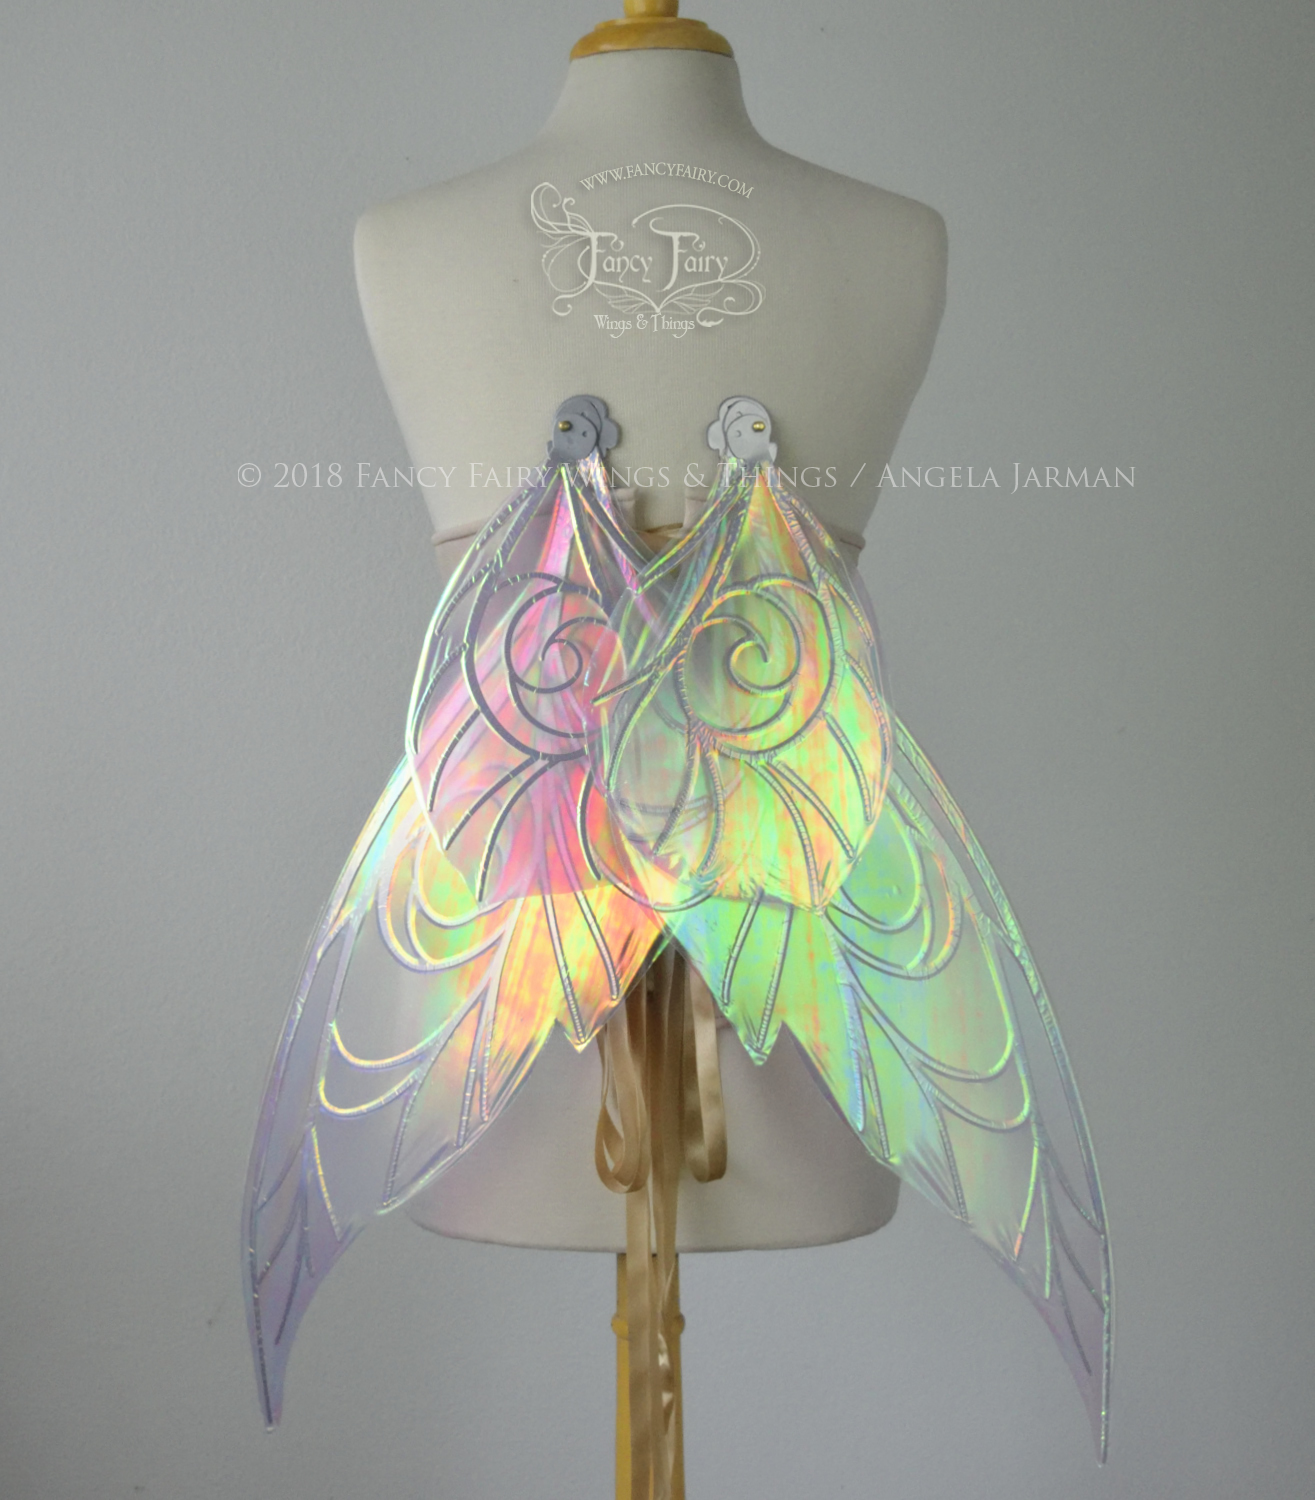 Back view of transparent green/yellow/orange iridescent Tinker Bell inspired fairy wings with swirly white veins, displayed on a dress form in resting position